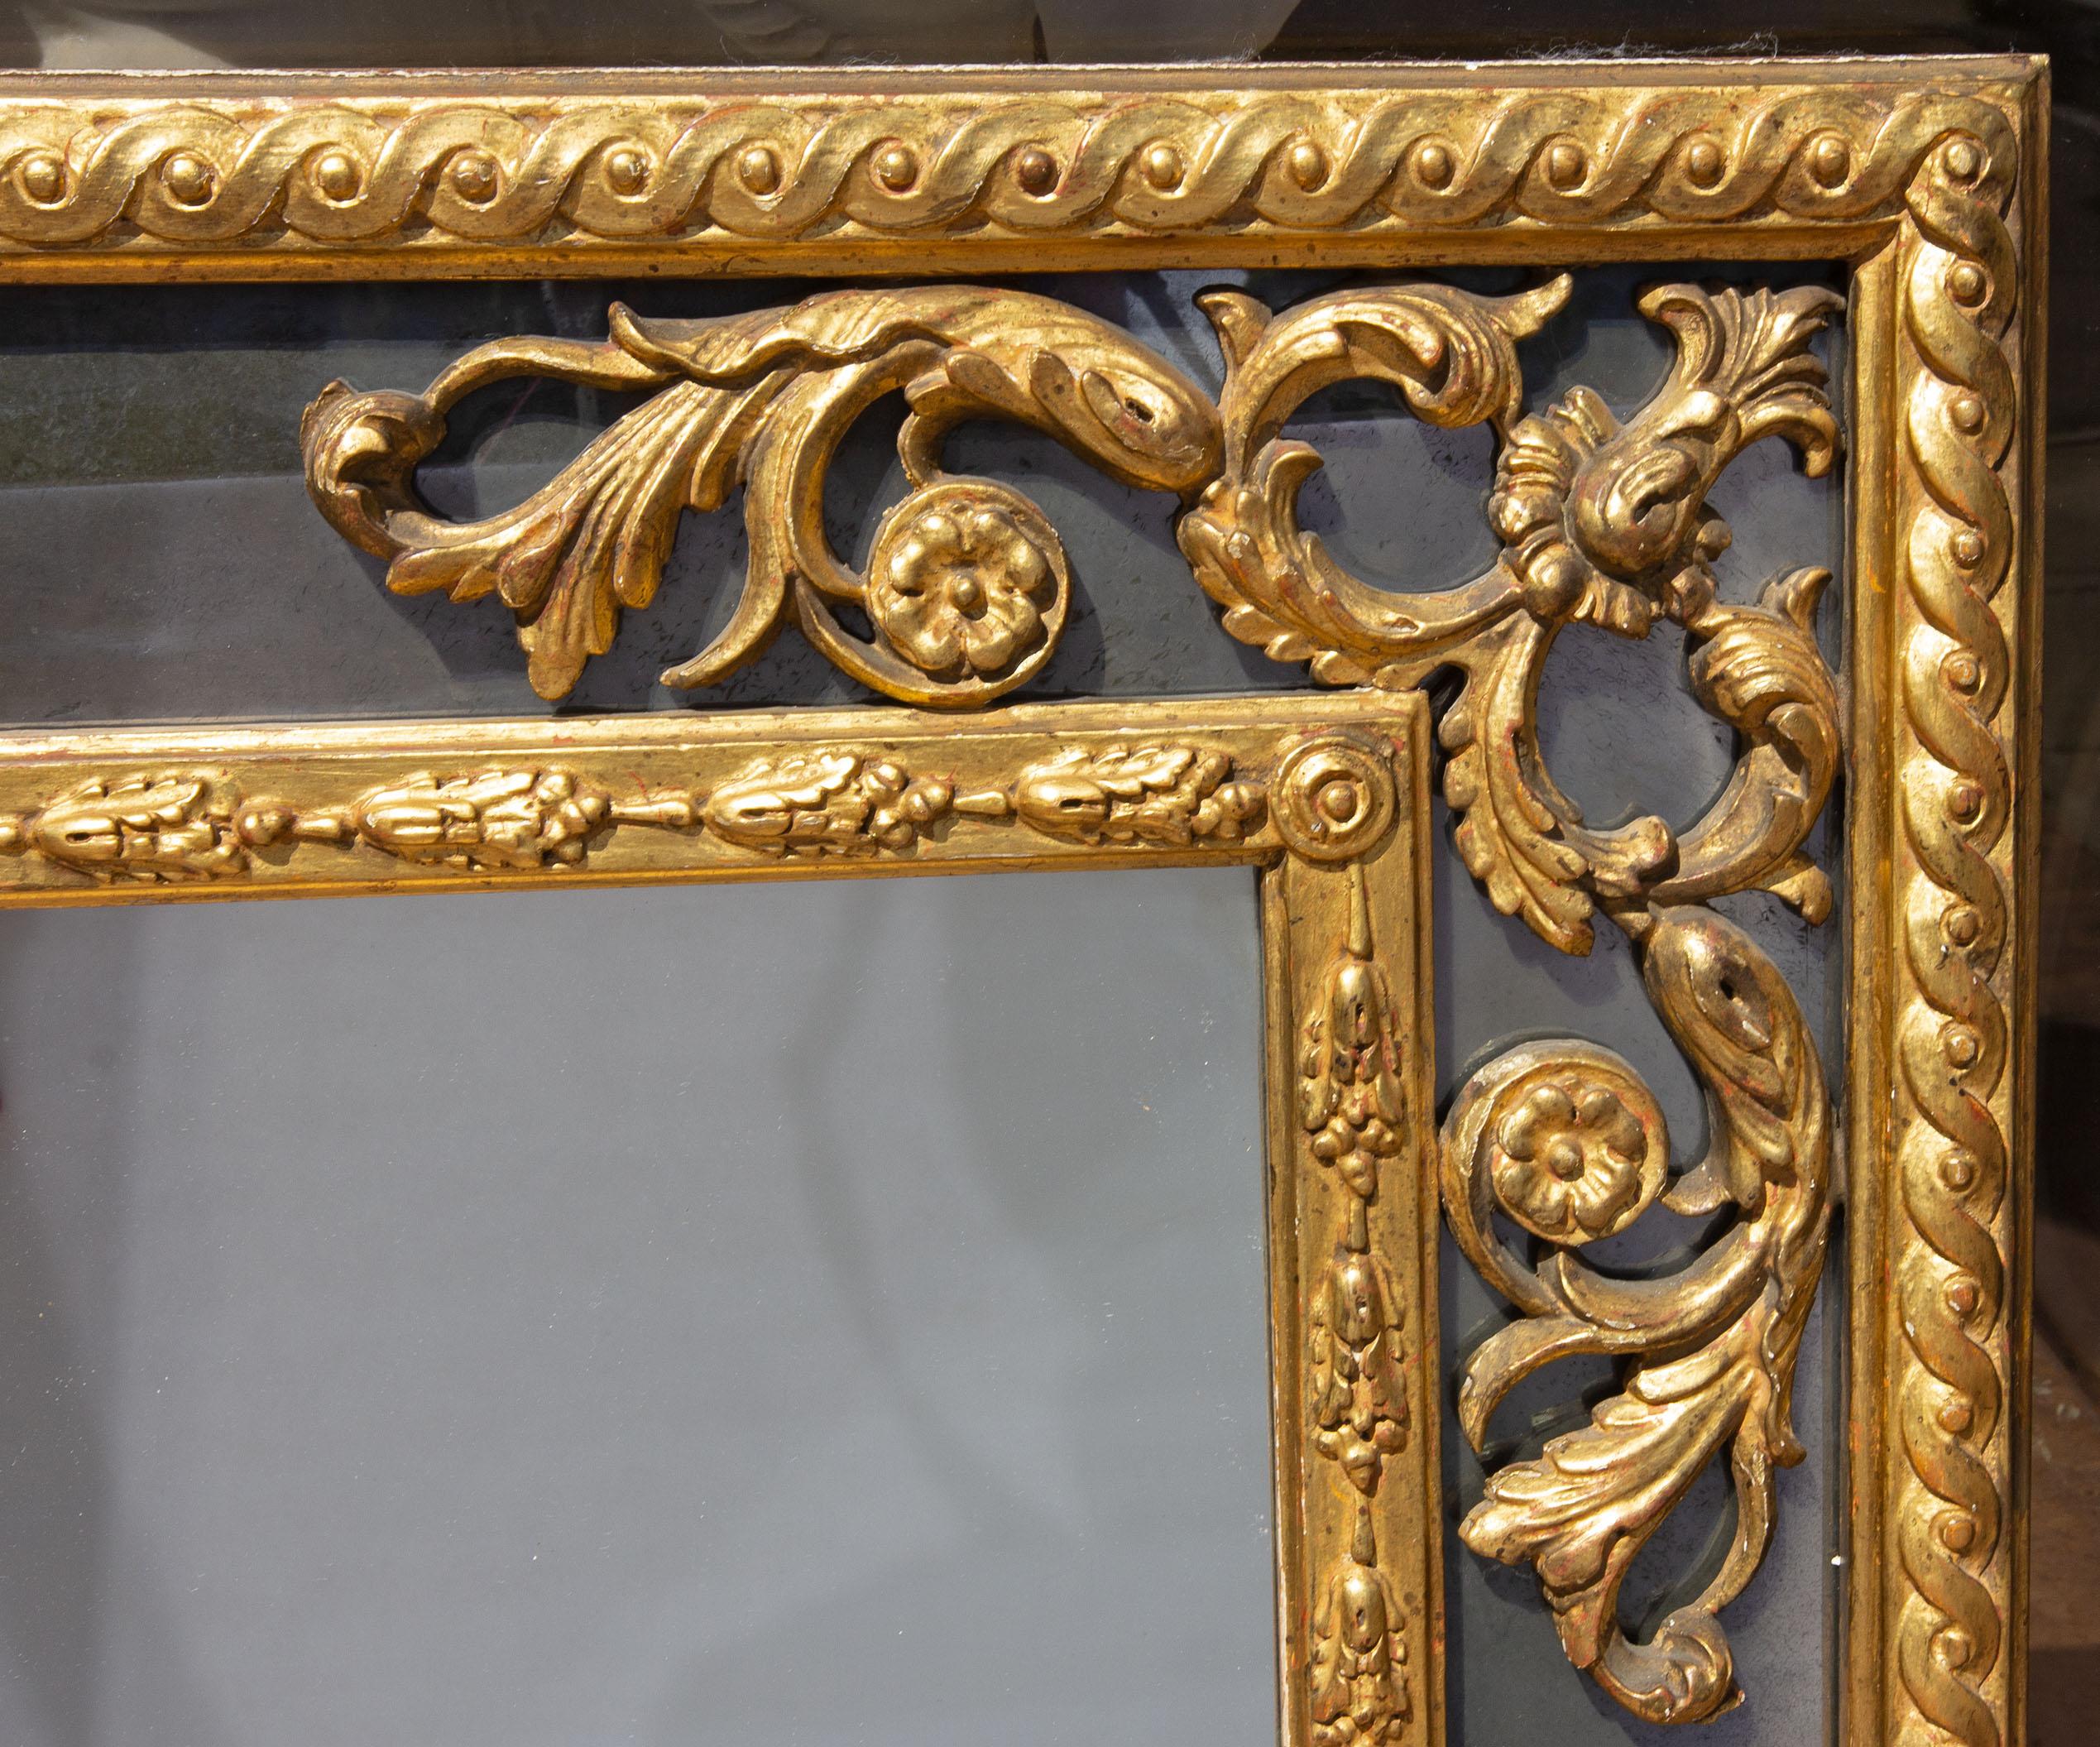 Antique carved and gilt paneled mirror. Side panels are smoked mirror glass. Great quality, early 20th century. Measures: 58.5